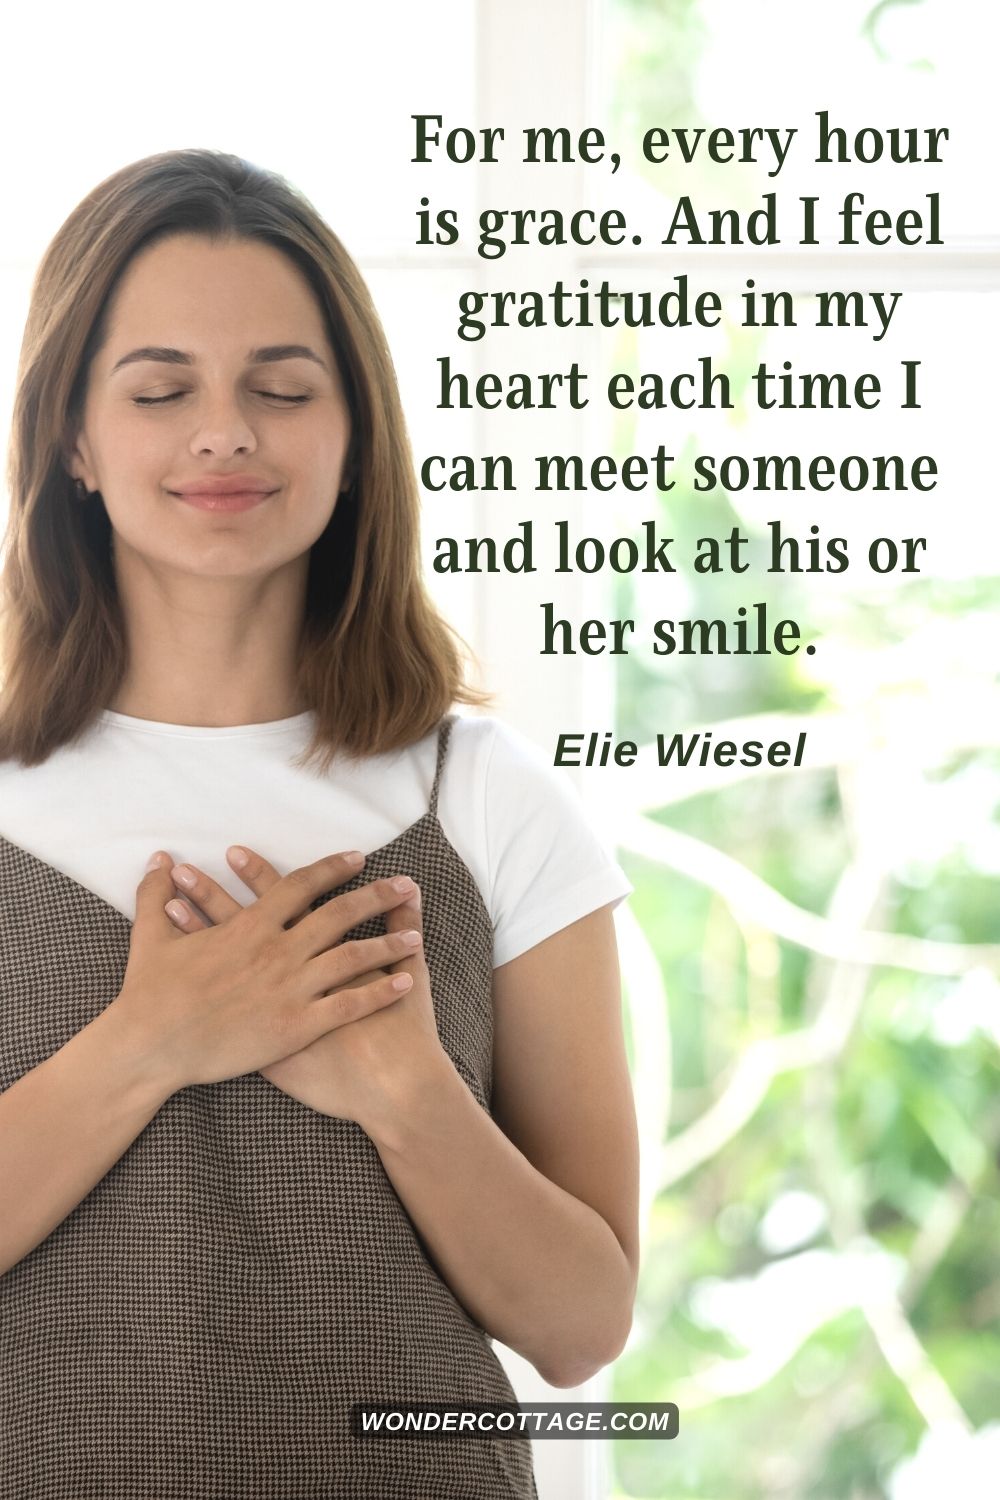 For me, every hour is grace. And I feel gratitude in my heart each time I can meet someone and look at his or her smile. Elie Wiesel